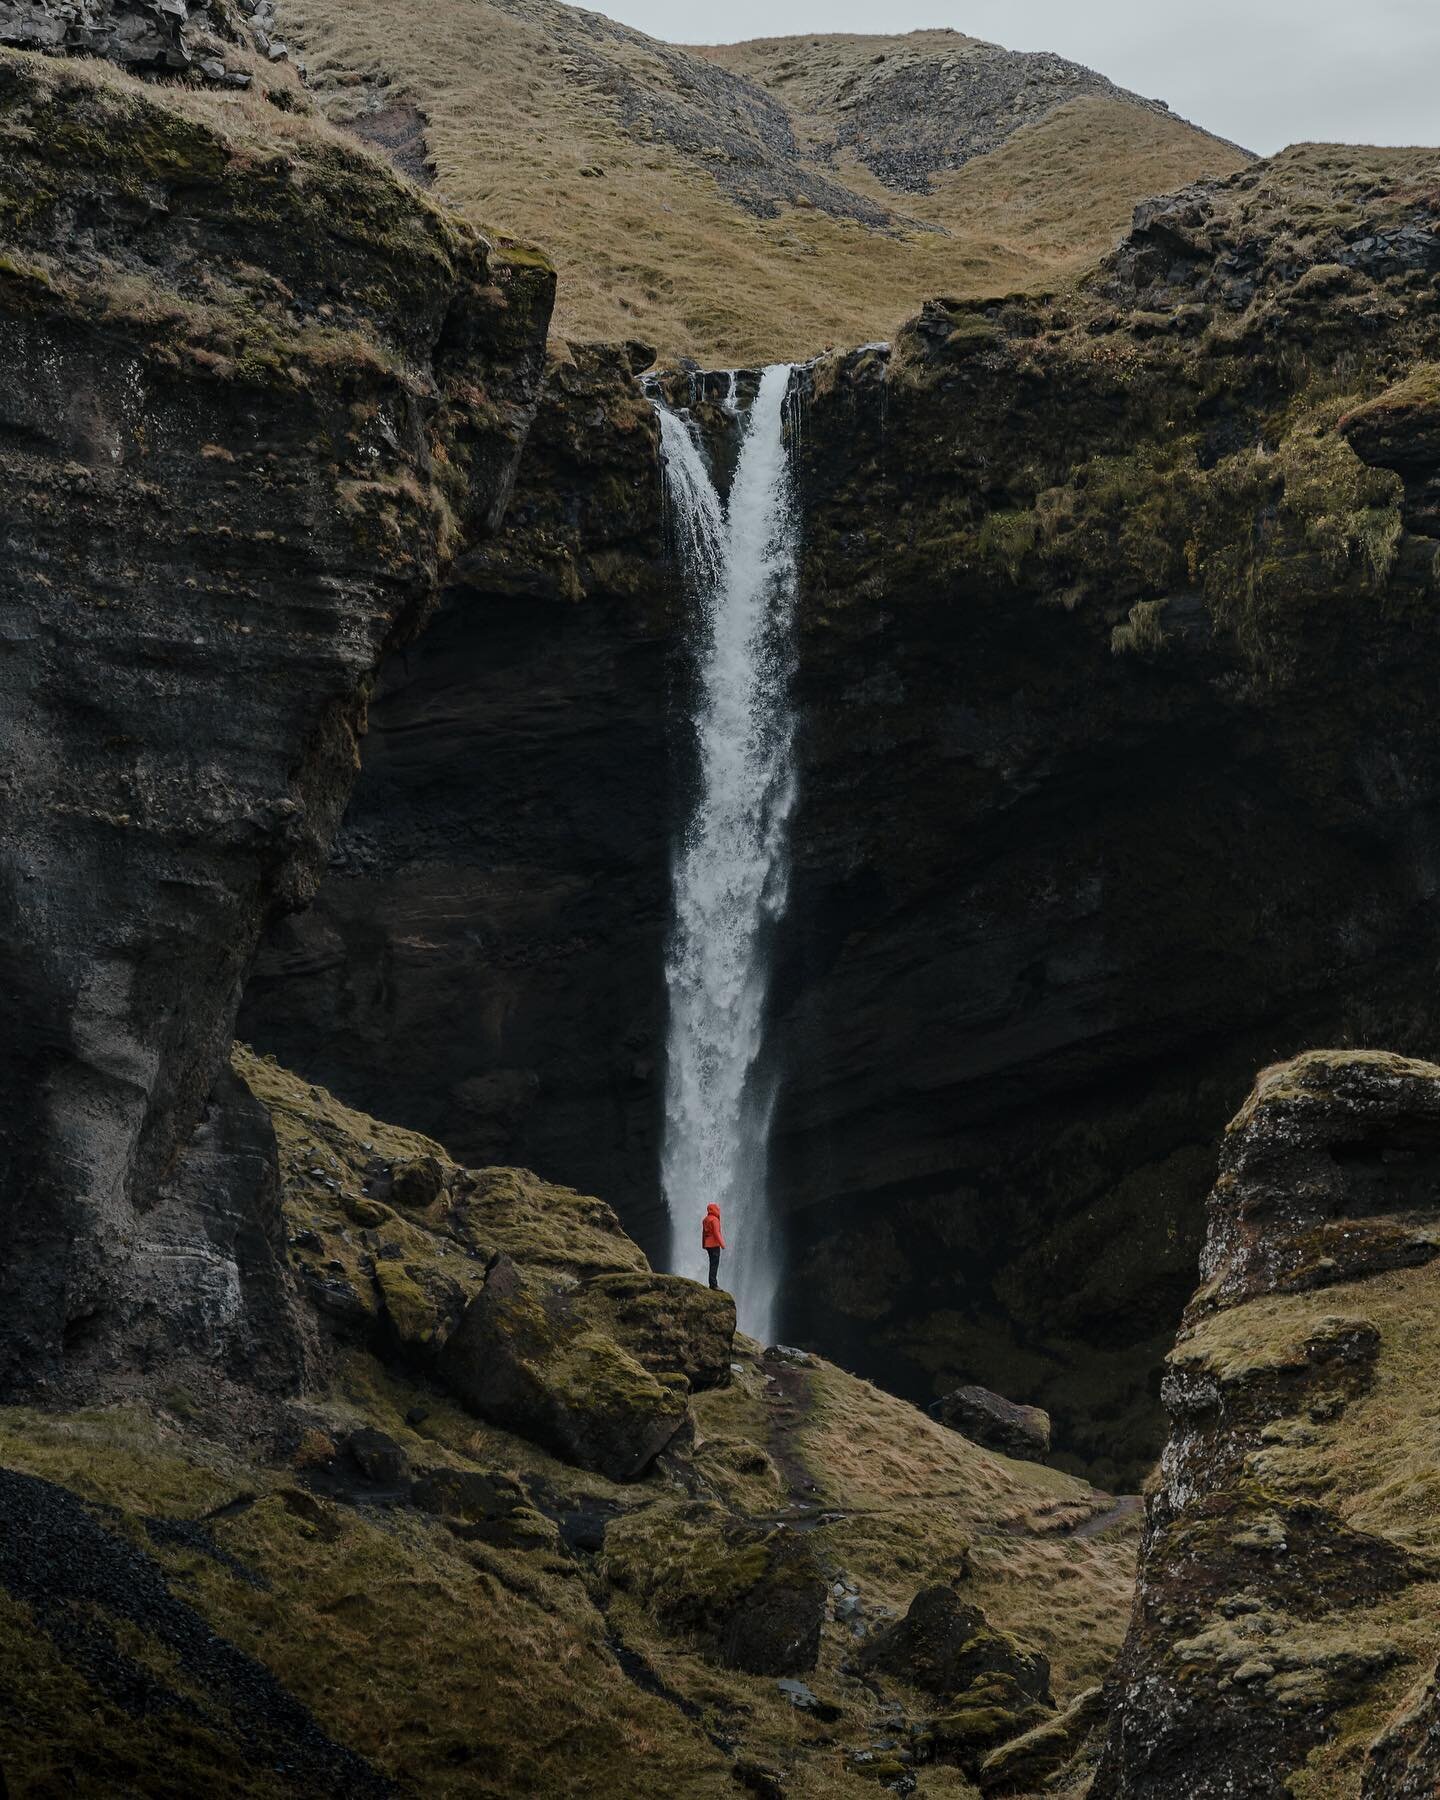 Another of Iceland&rsquo;s beautiful waterfalls. This one is tucked away at the end of lush green canyon which twists and turns until you finally see the water crashing down ahead of you. Thanks to @celinahackmann for providing some scale to the shot